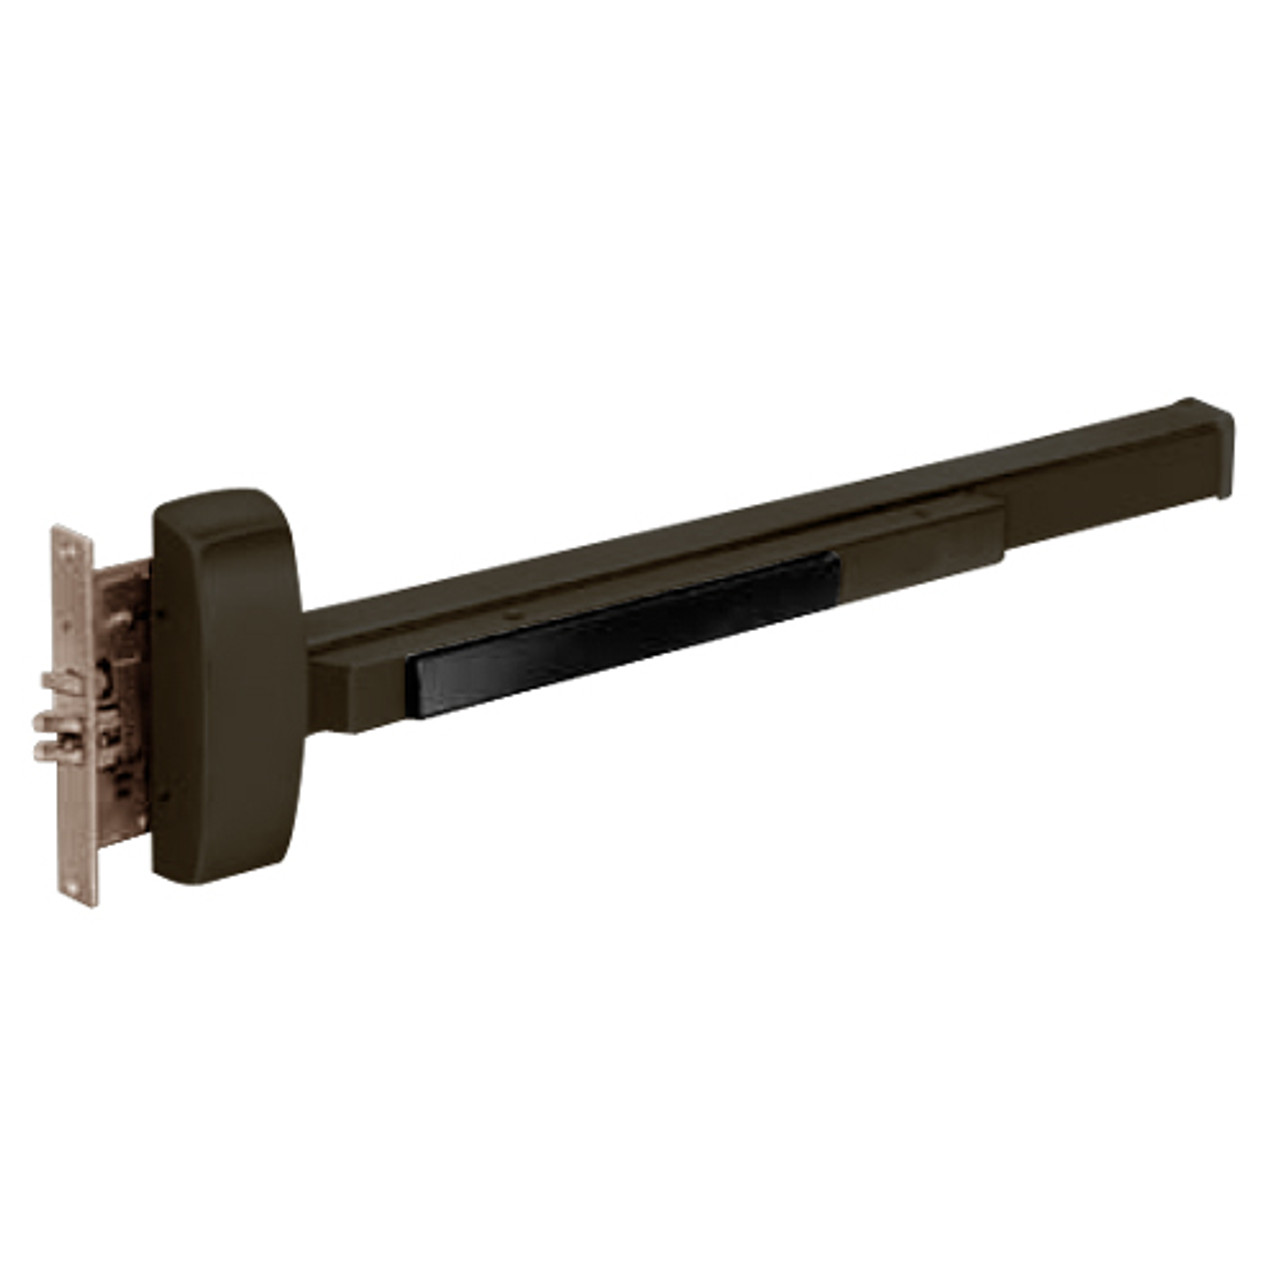 8910J-RHR-10B Sargent 80 Series Exit Only Mortise Lock Exit Device in Oil Rubbed Bronze